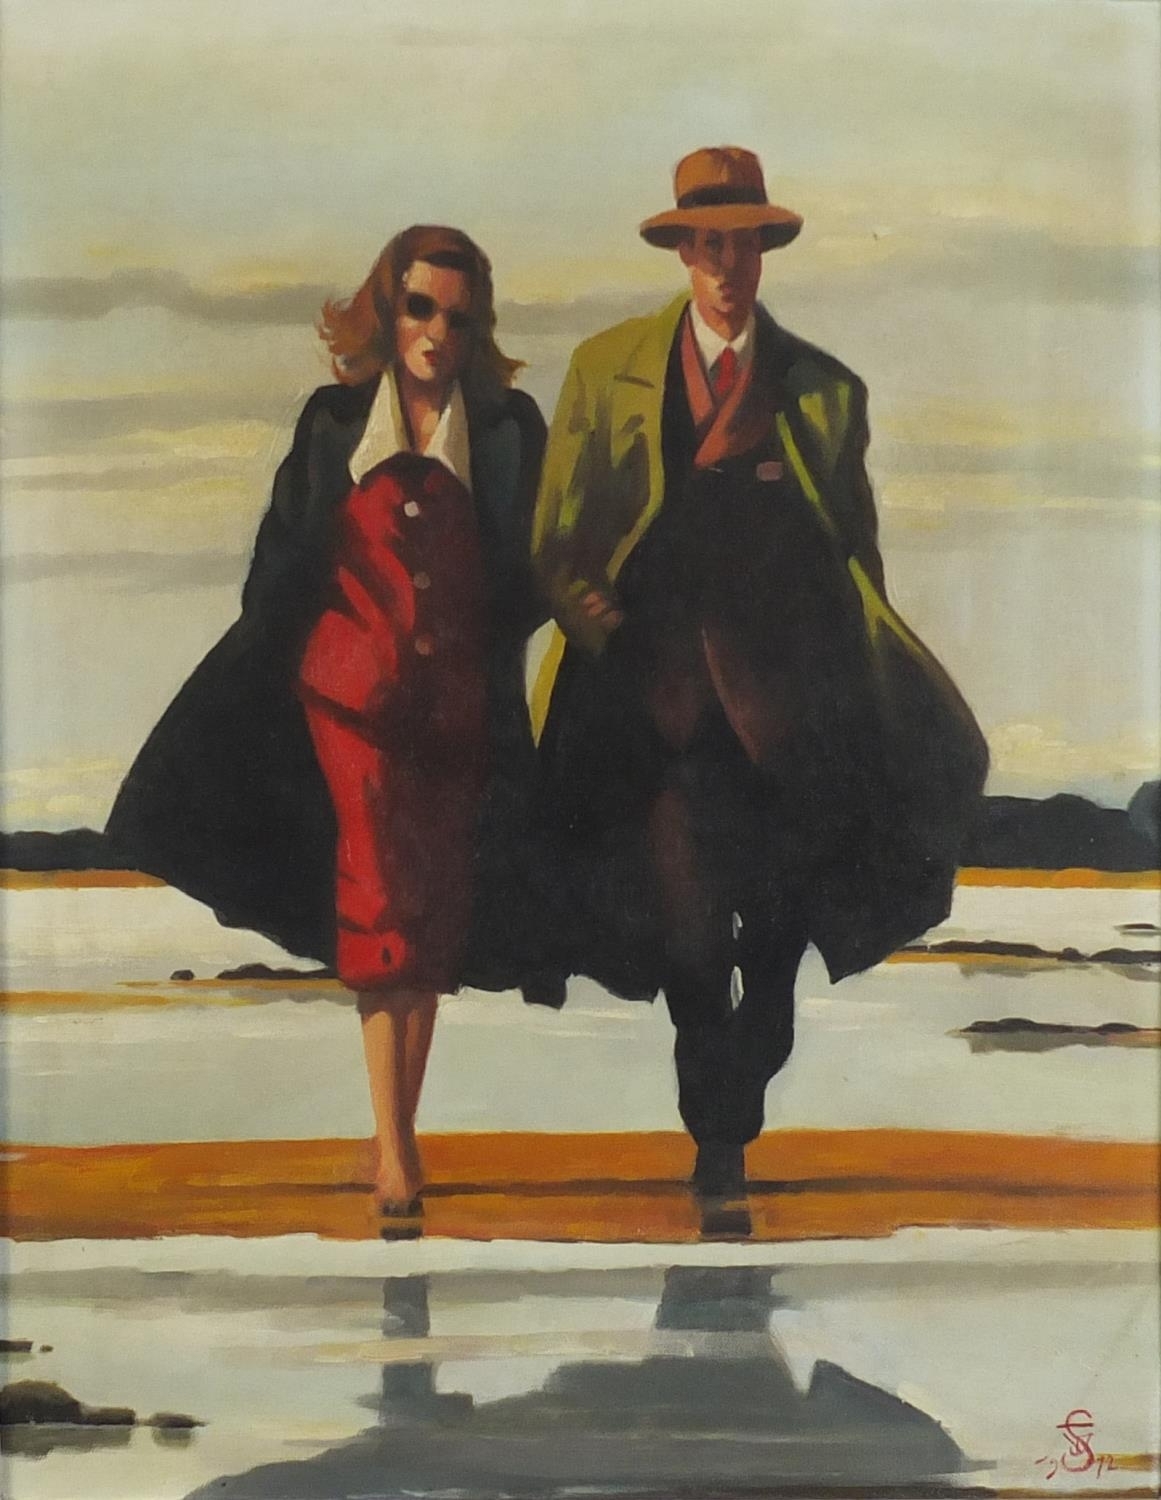 Figures walking on a beach by Jack Vettriano